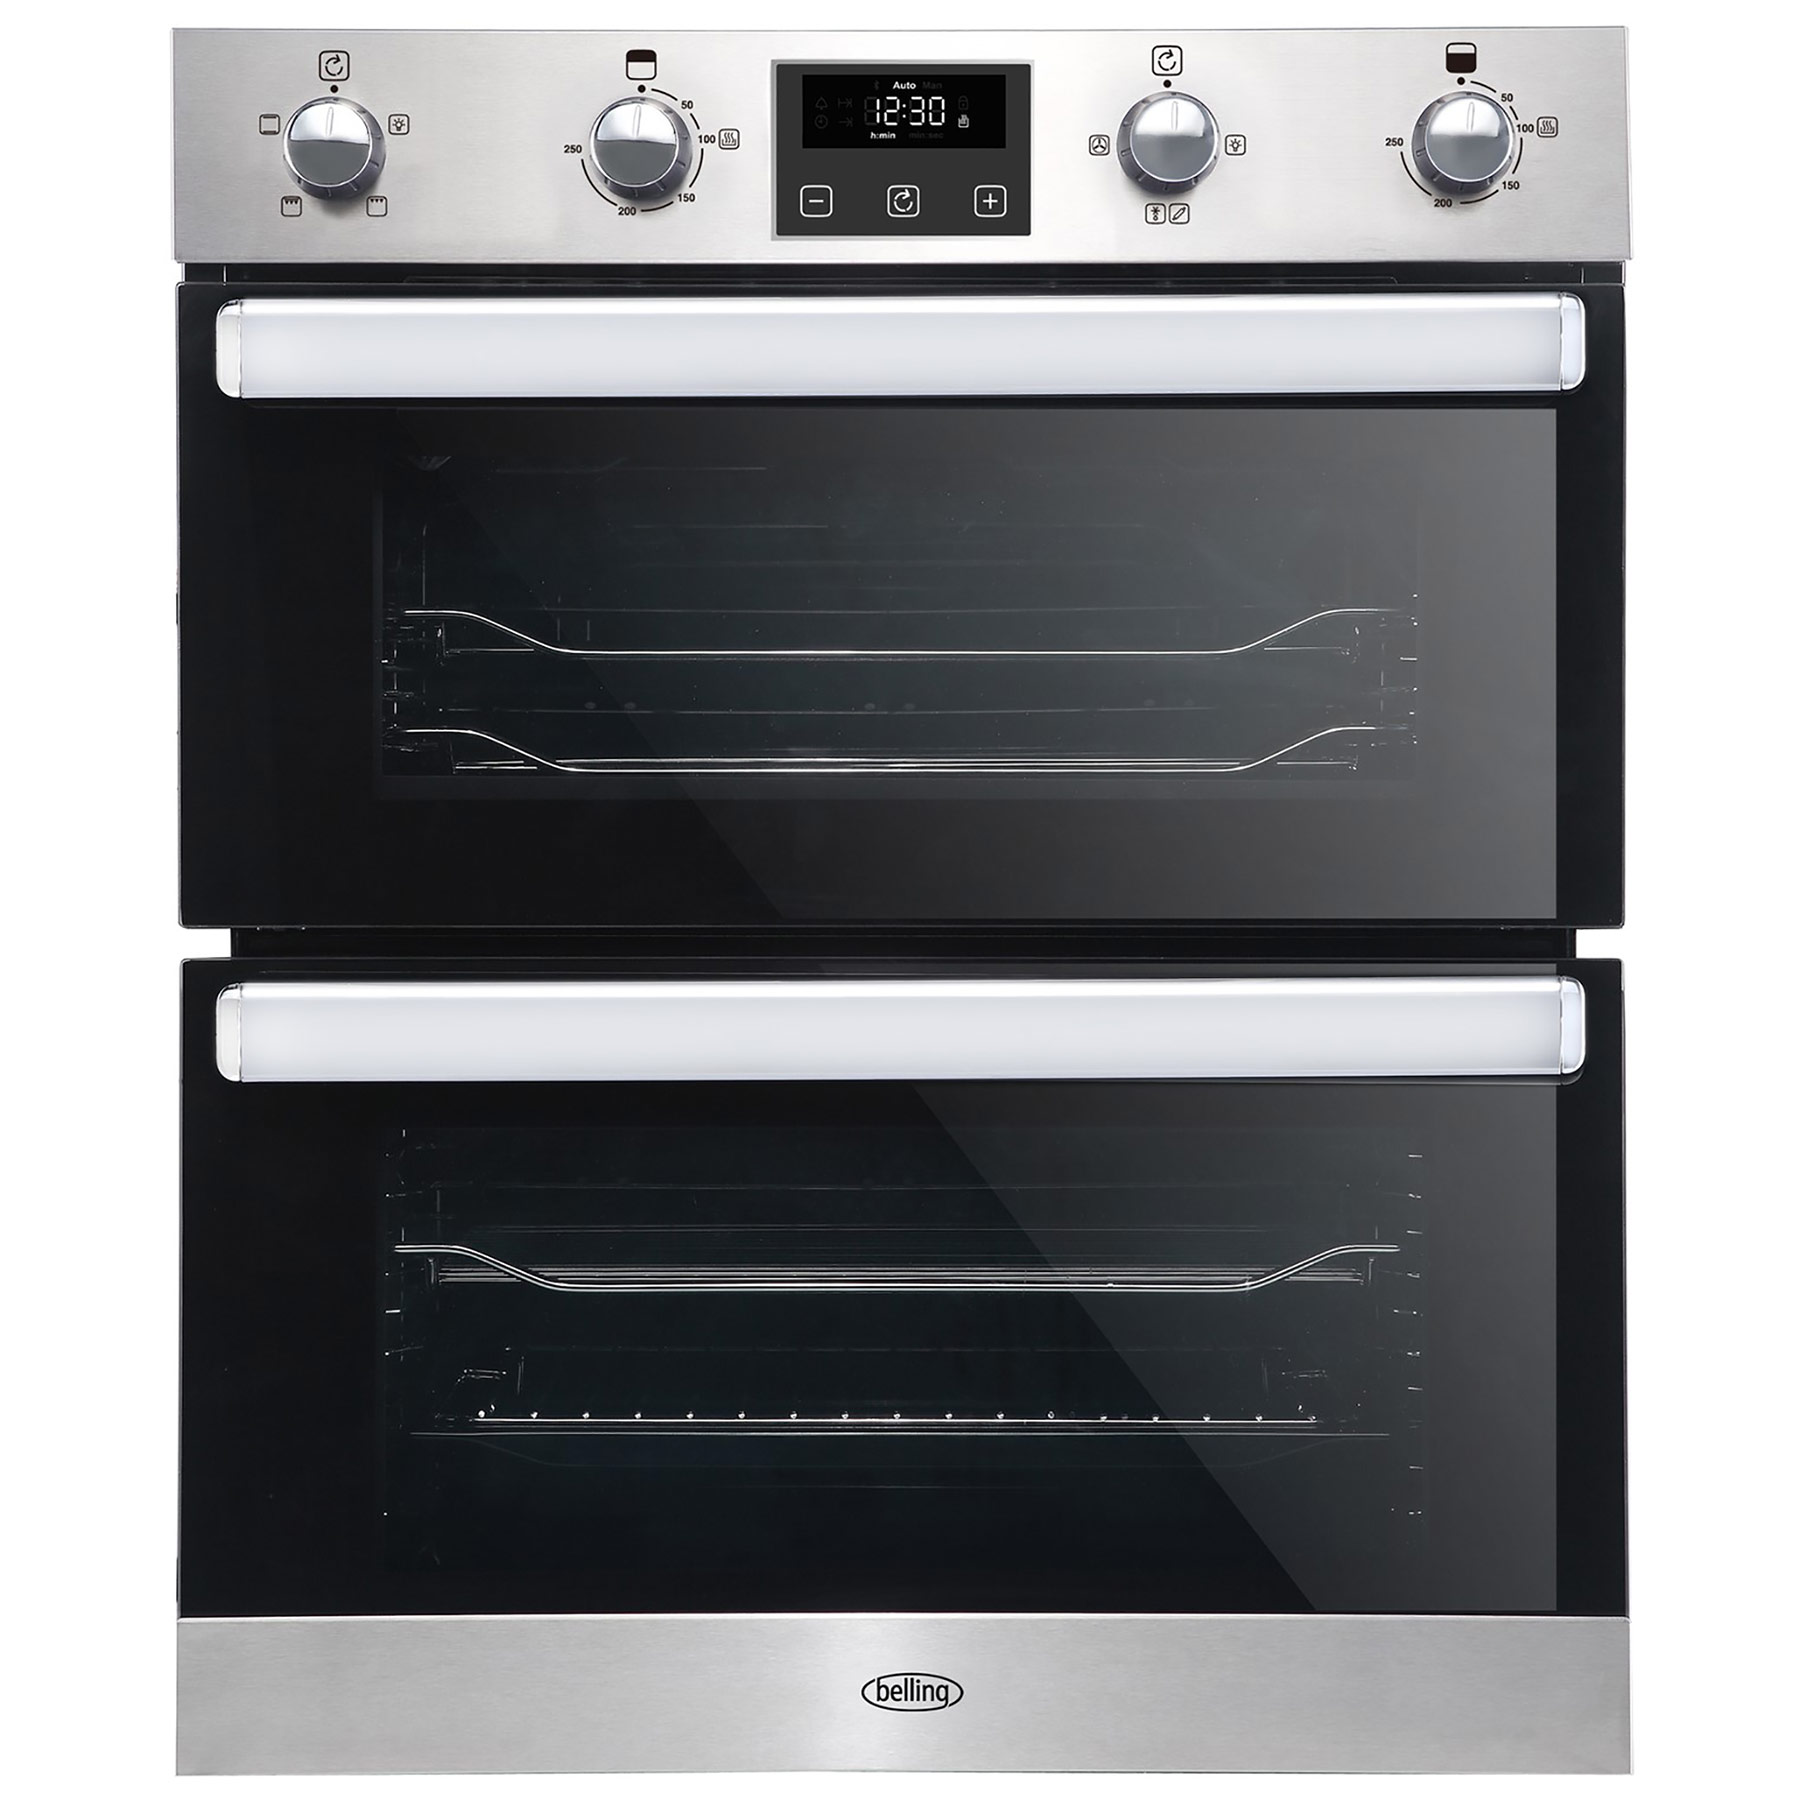 Image of Belling 444444783 70cm Built Under Electric Double Oven Stainless Stee